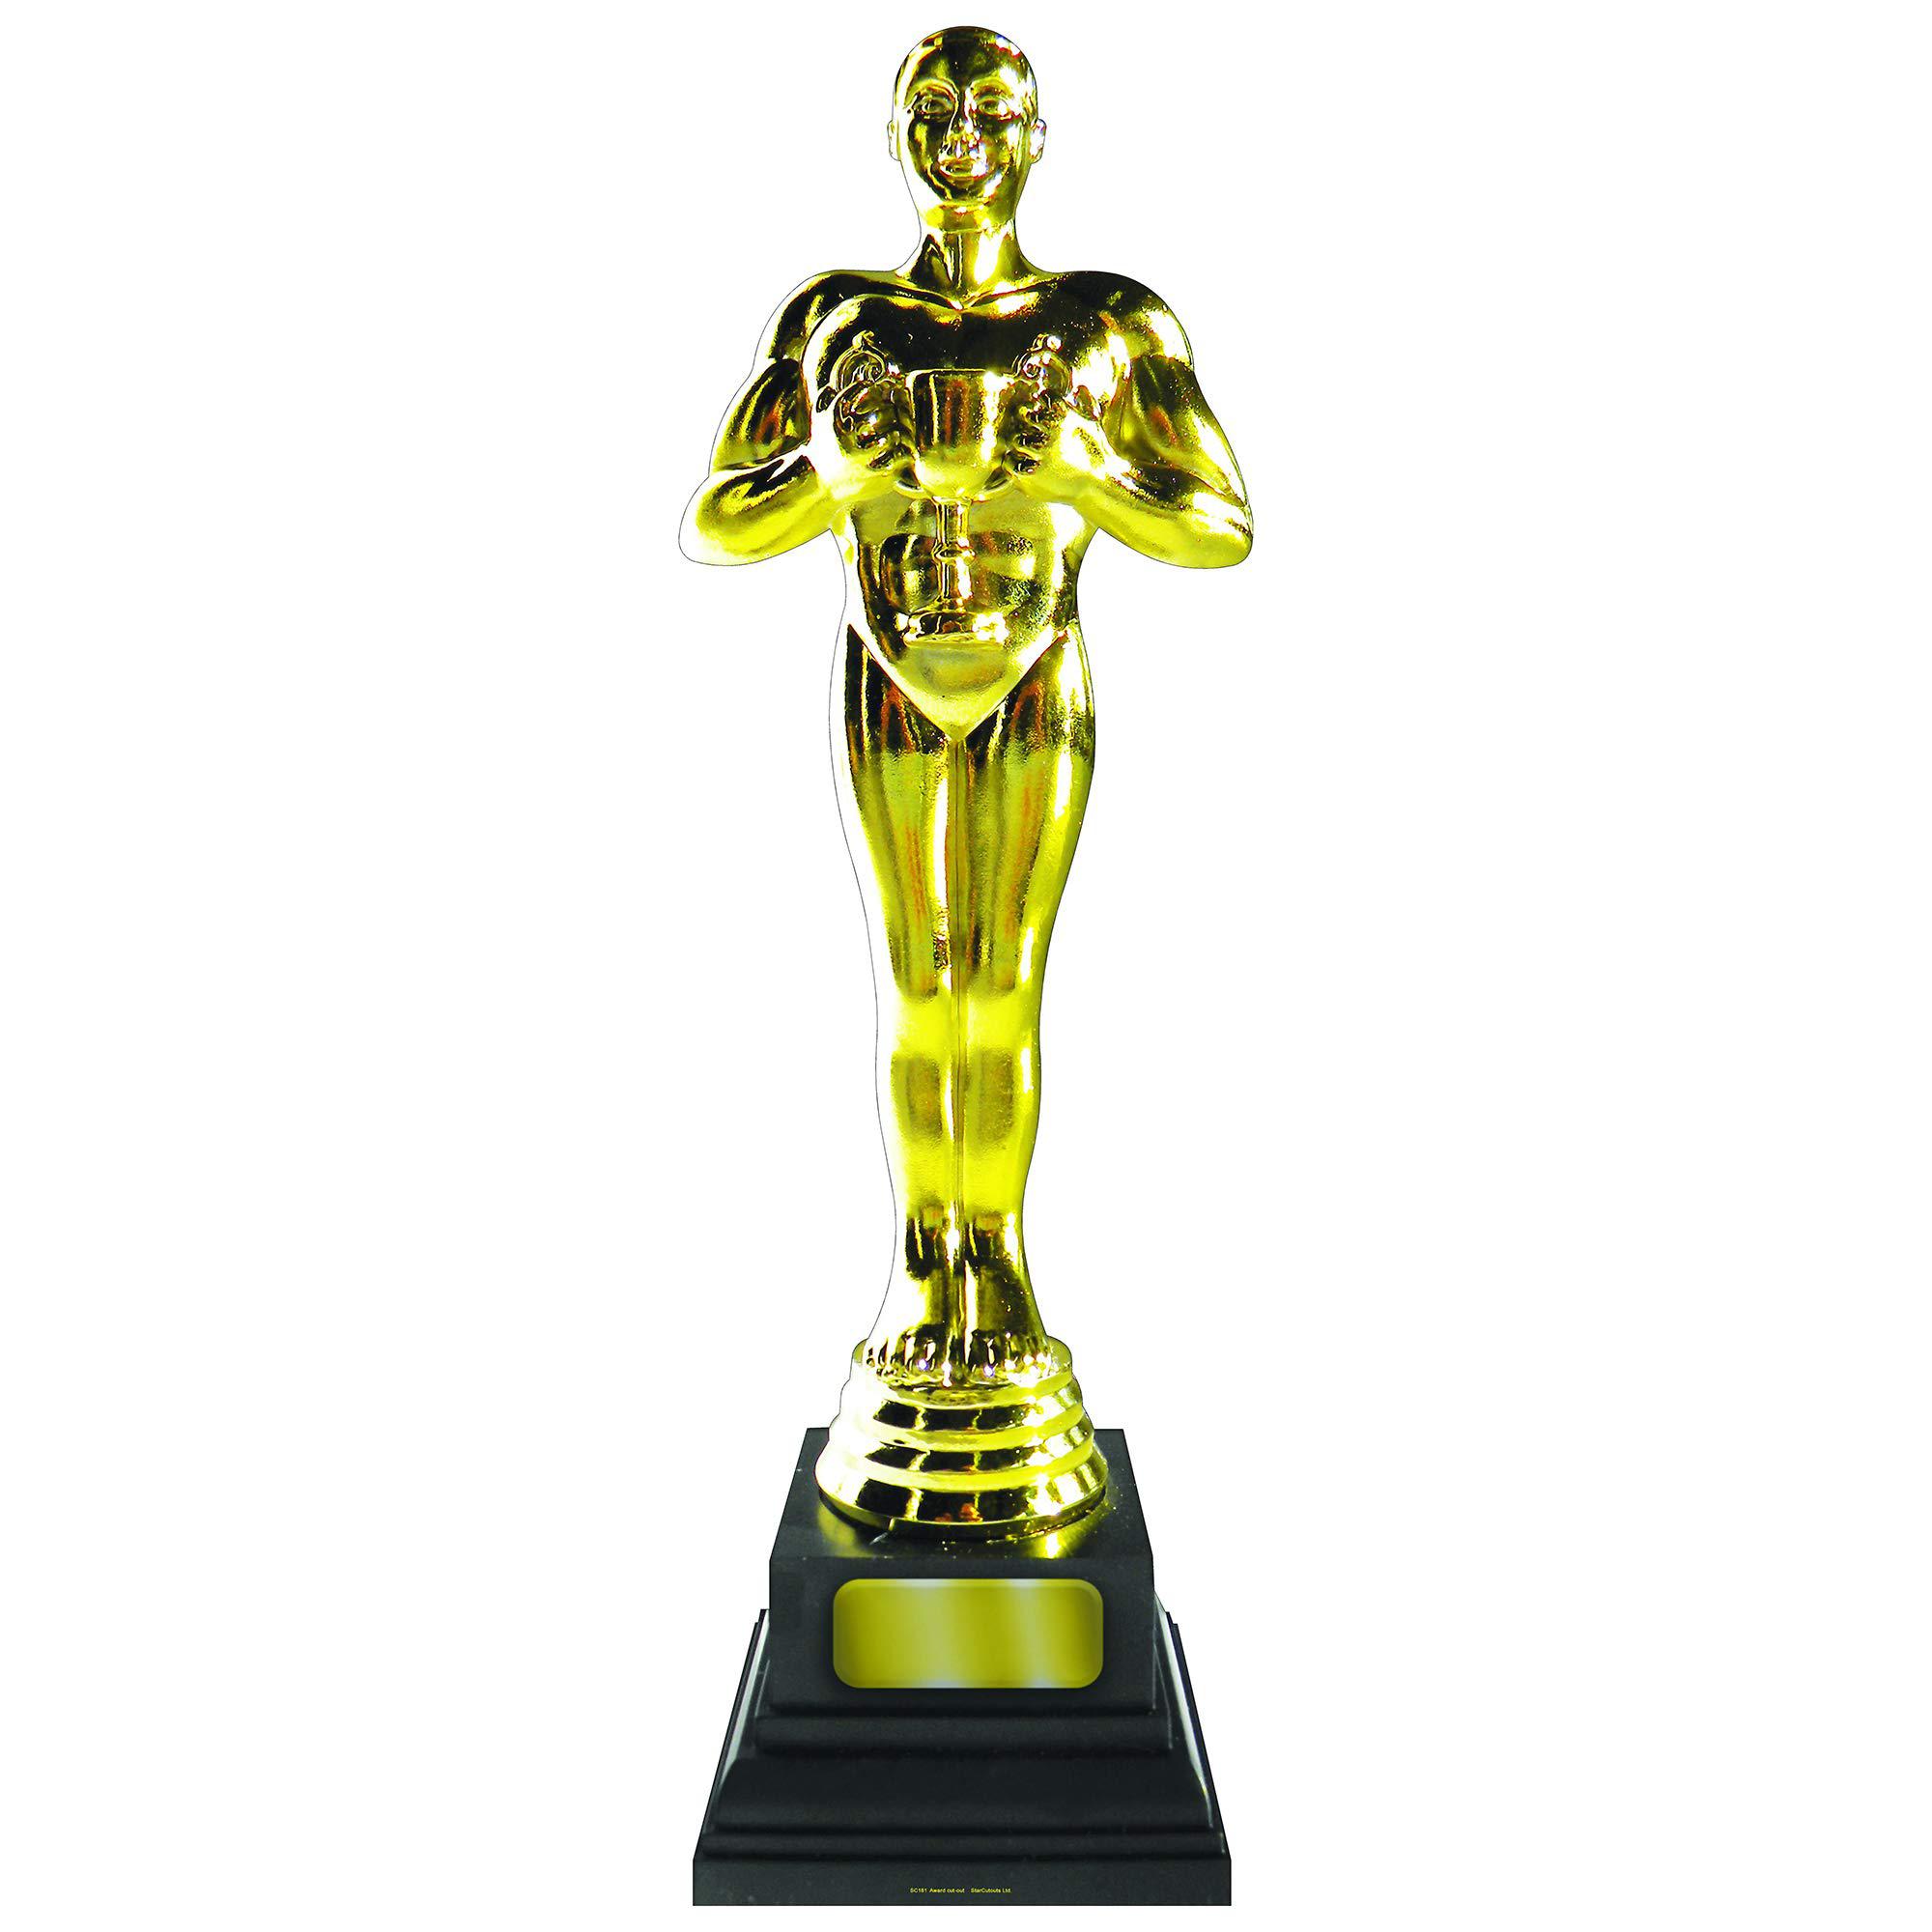 Star Cutouts LLC star cutouts, gold award, cardboard cutout stand-up, party prop stand-in - 72" x 22"